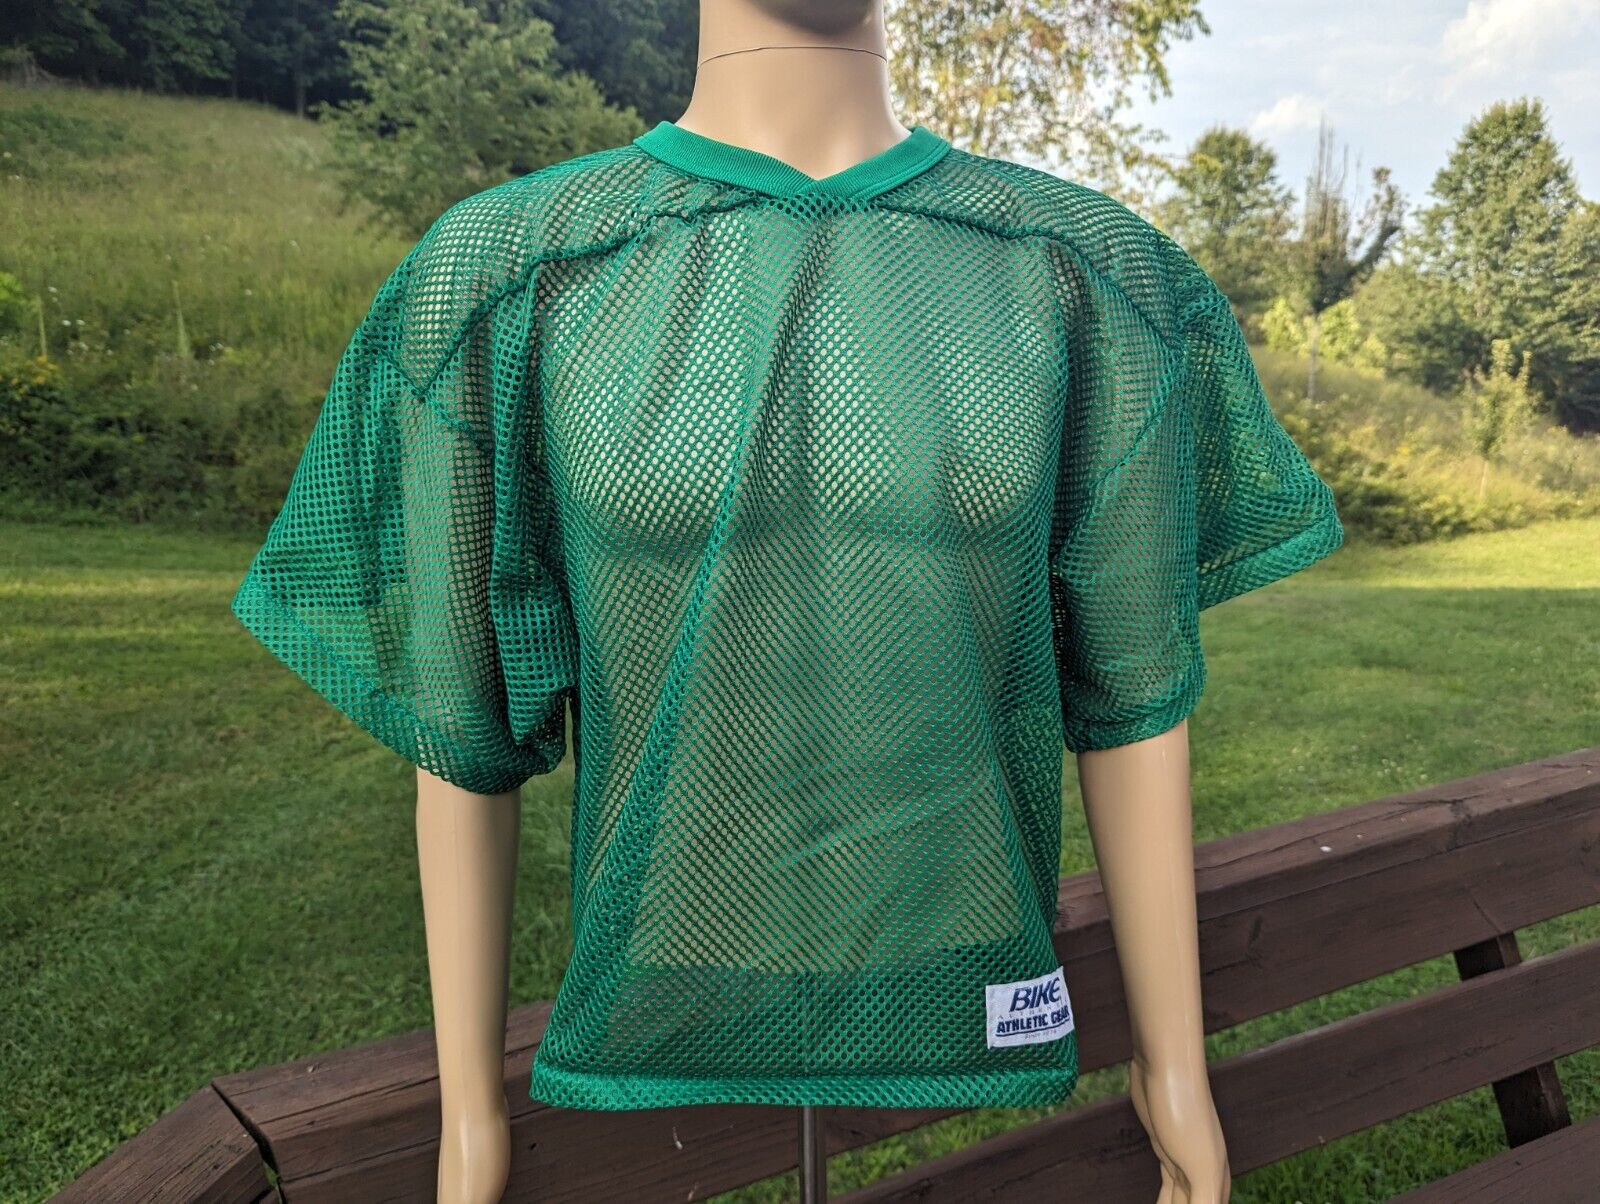 Vintage Bike Football Jersey Green Mesh Mens Size L/XL New Old Stock